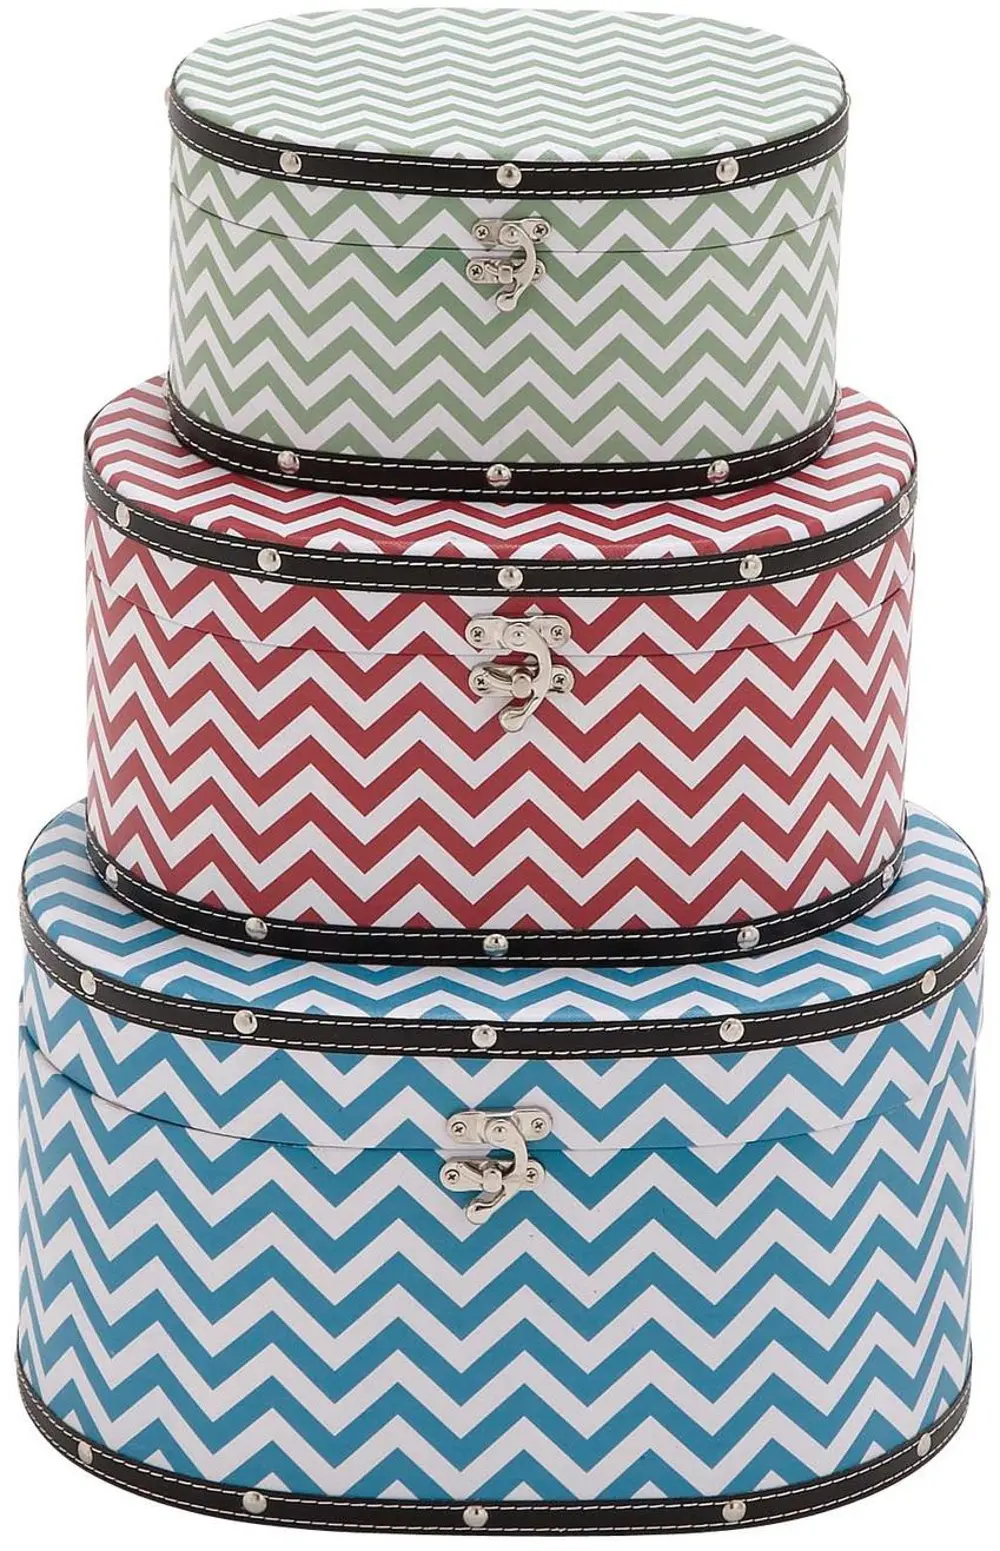 14 Inch Round Wood and Vinyl Chevron Patterned Box -1